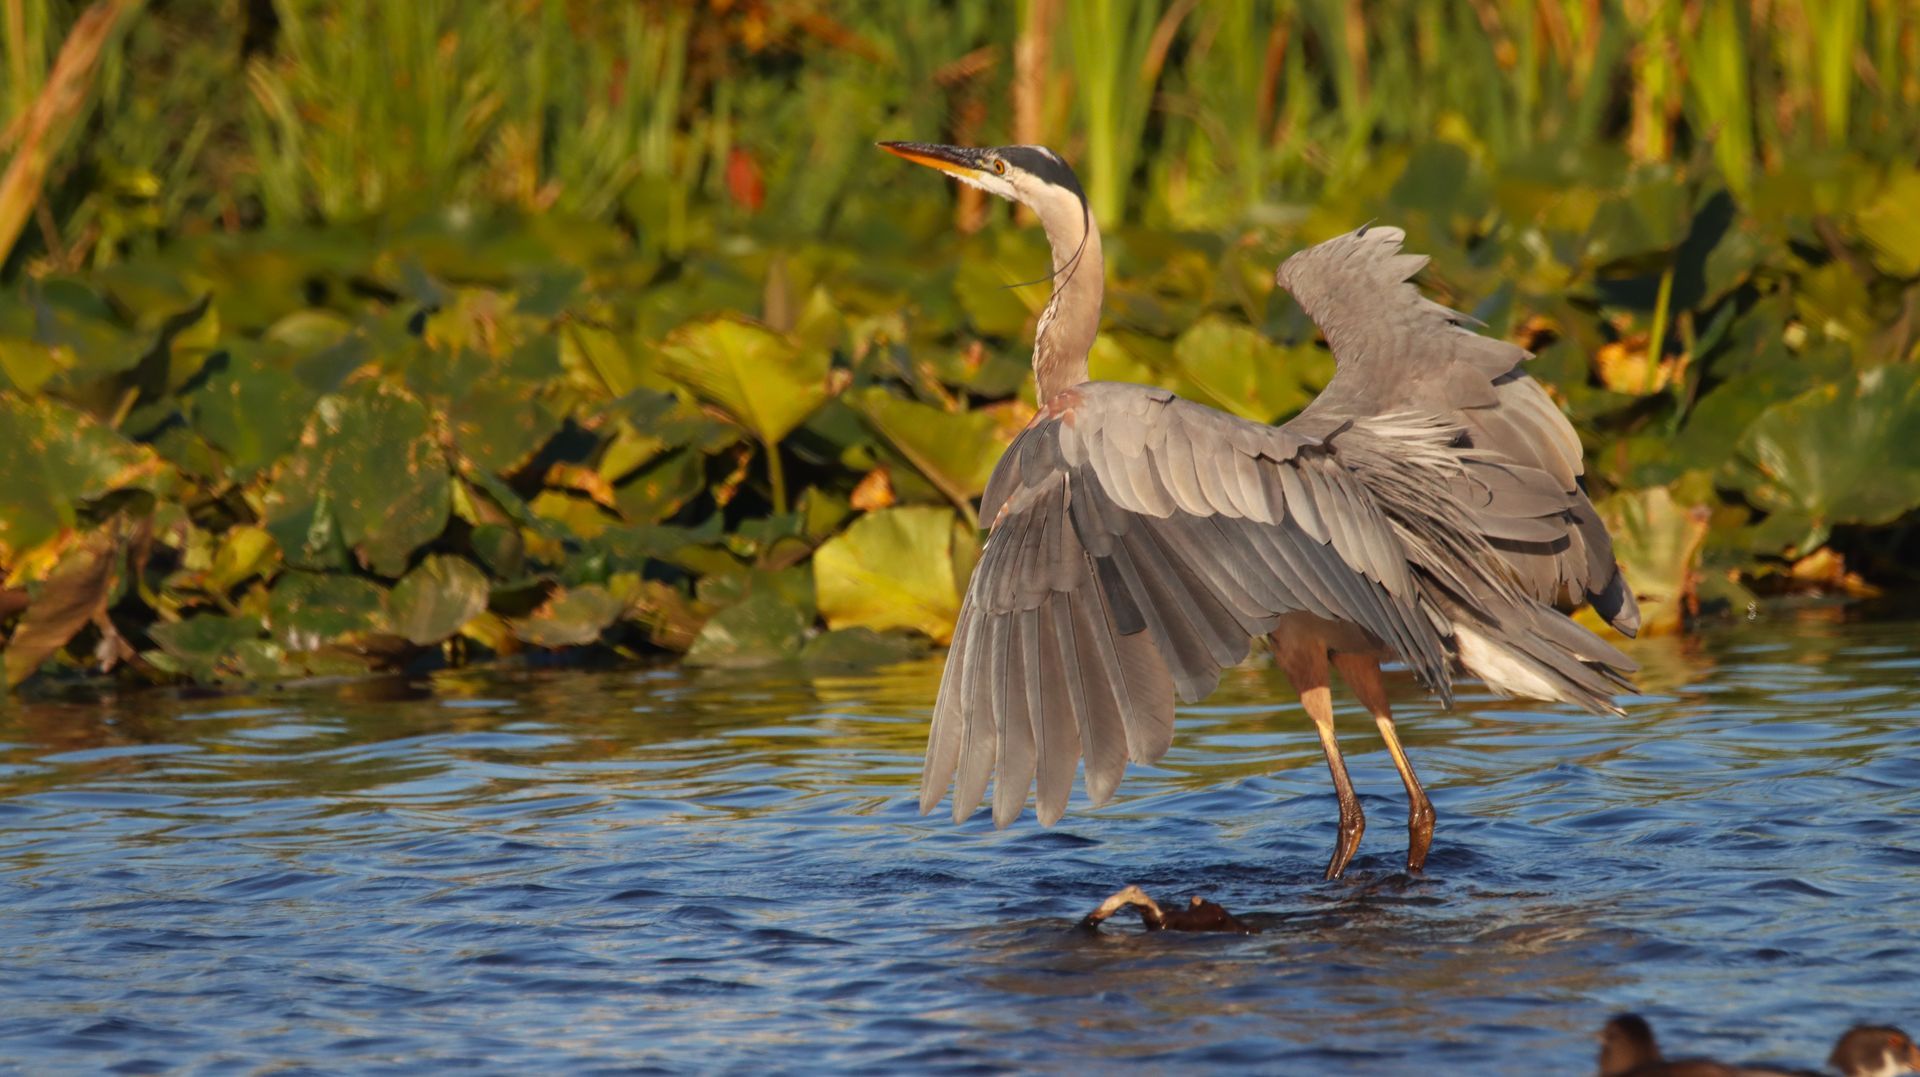 A bird is standing in the water with its wings spread.